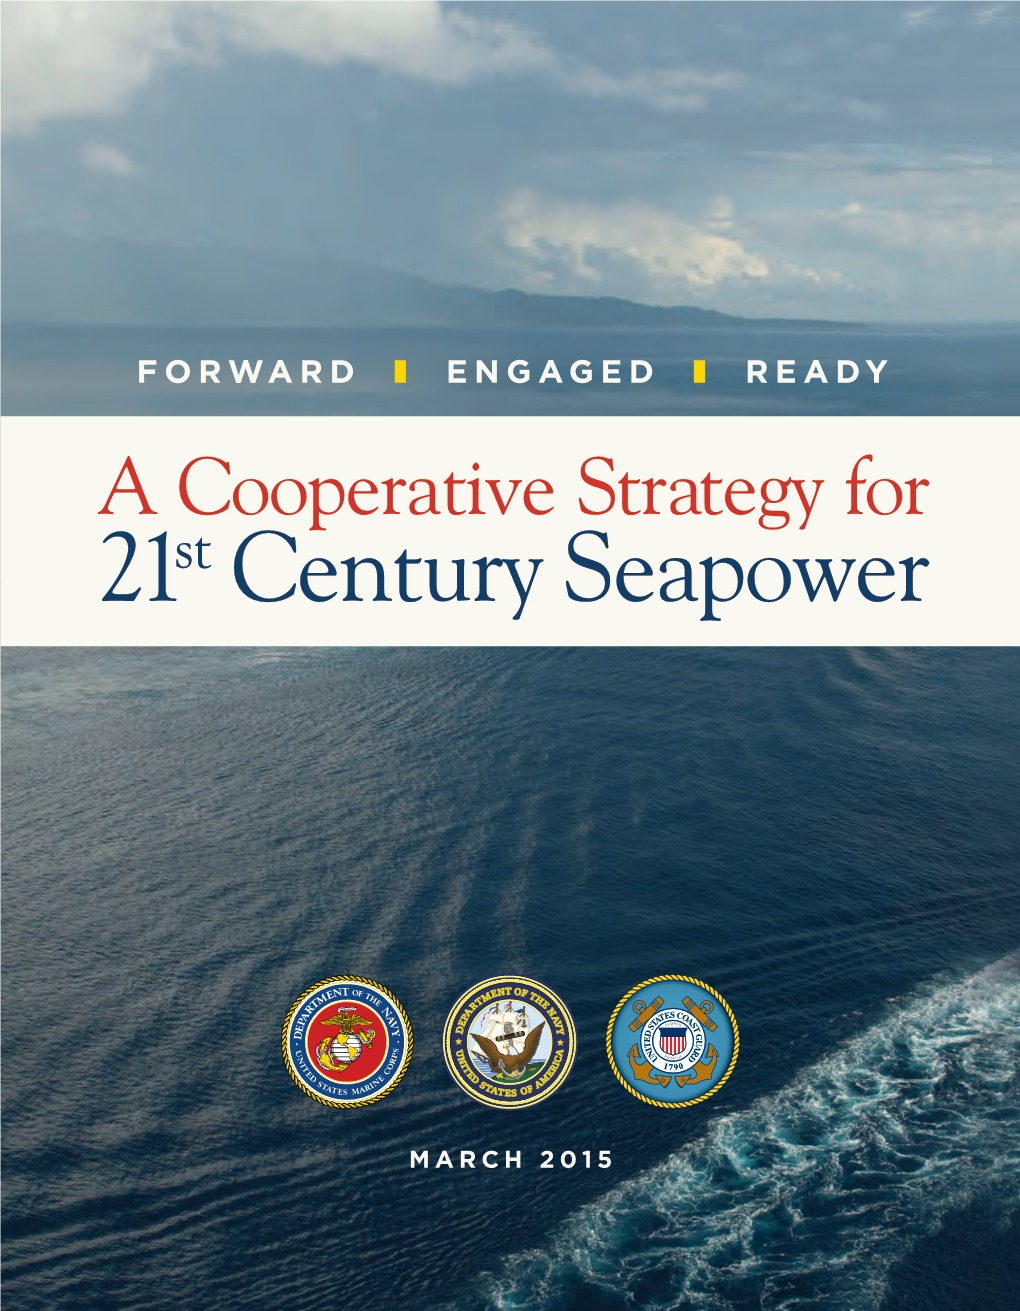 A Cooperative Strategy for 21St Century Seapower